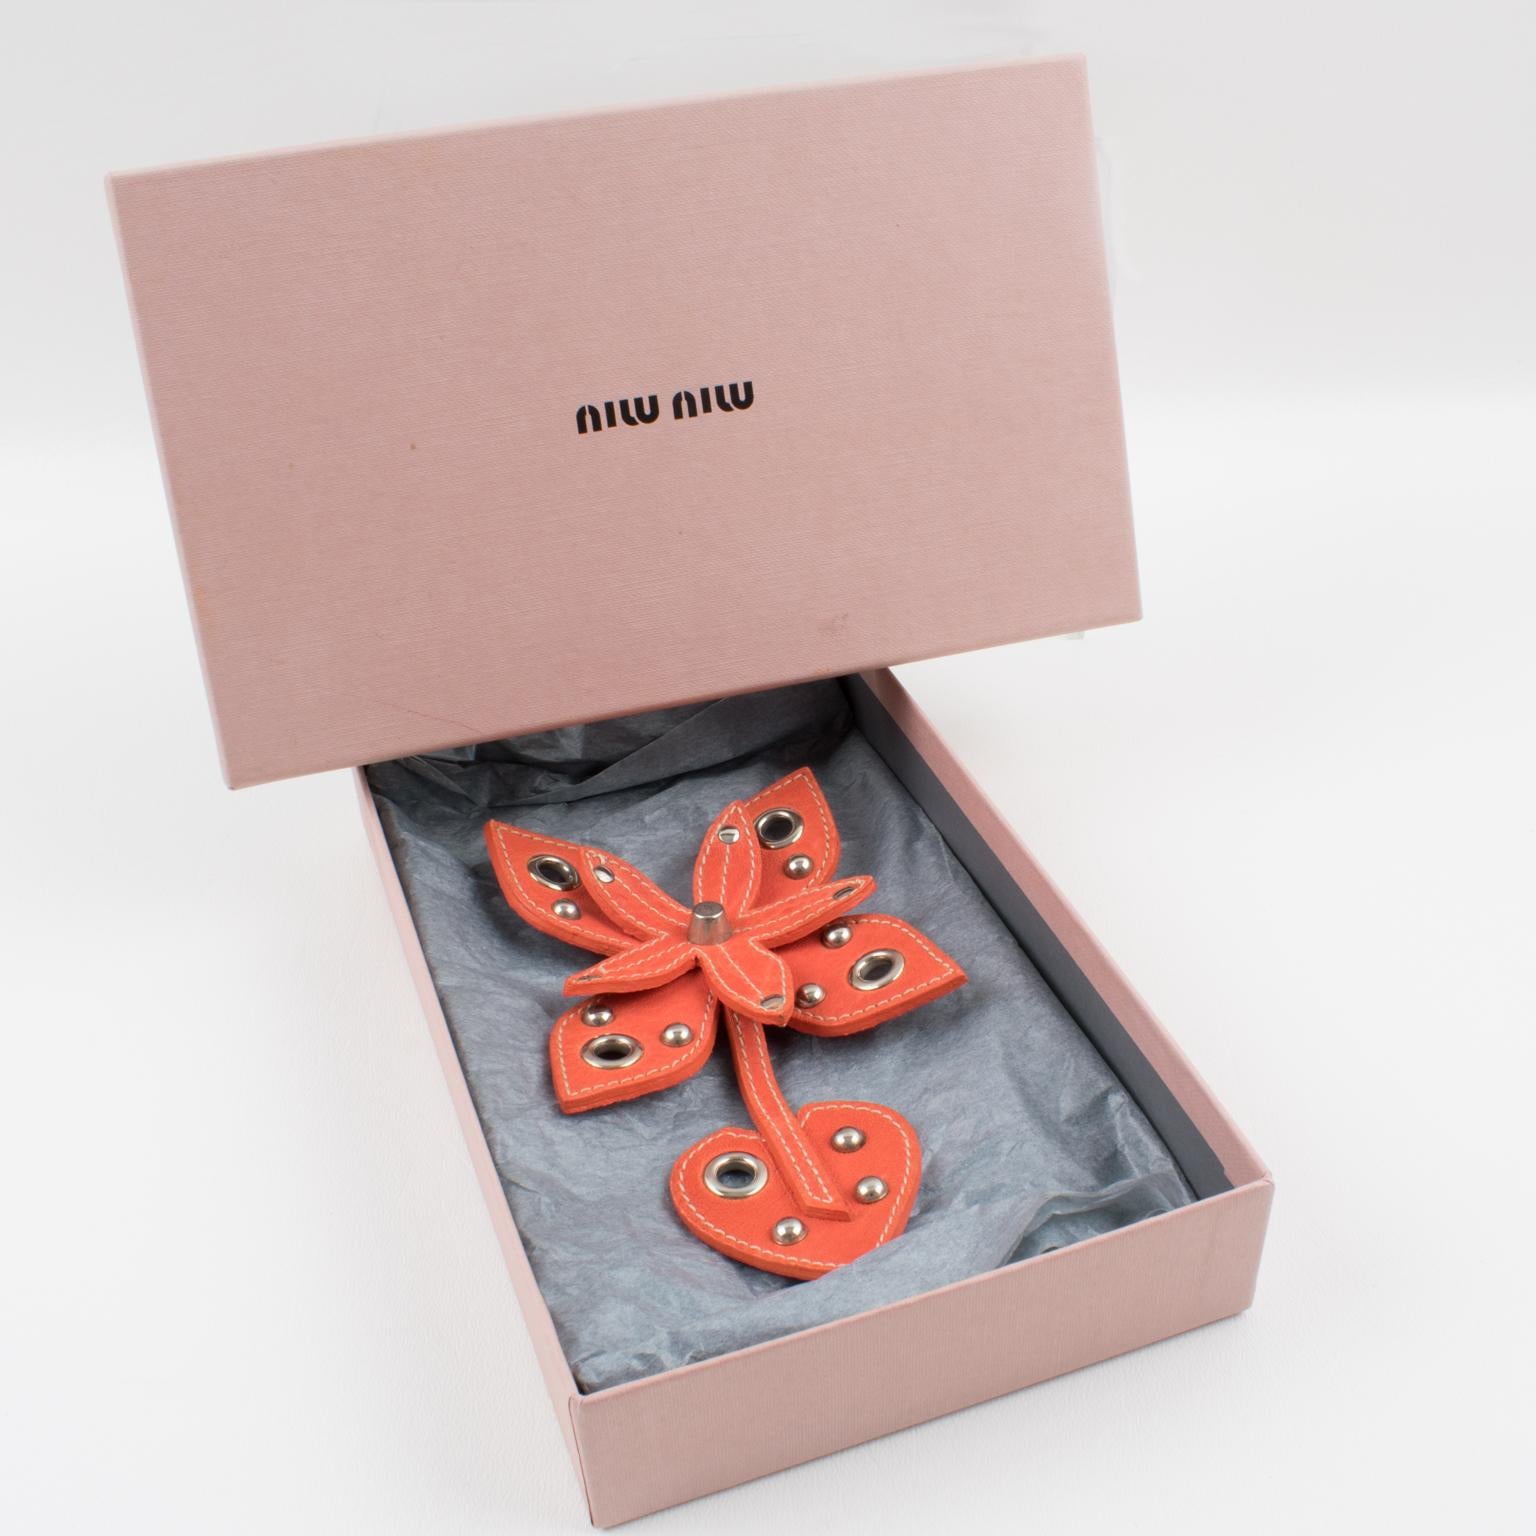 This adorable Miu Miu naturalist leather pin brooch features a giant stitched tangerine orange leather stylized flower shape ornate with stainless steel studs and eyelets. The piece is marked on the underside with the Miu Miu - made in Italy tag.